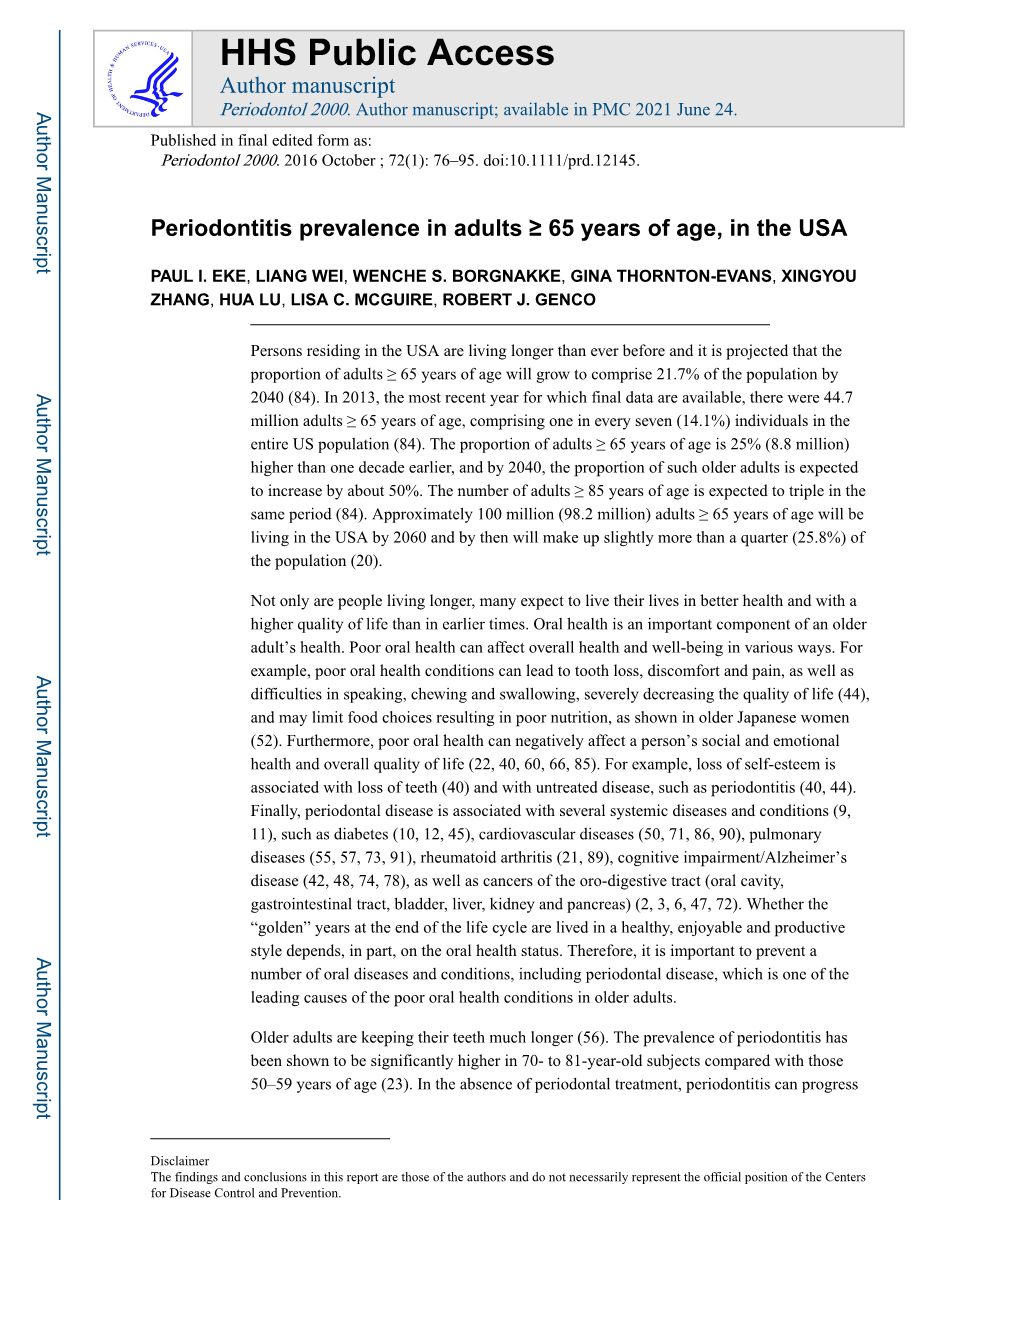 Periodontitis Prevalence in Adults ≥ 65 Years of Age, in the USA